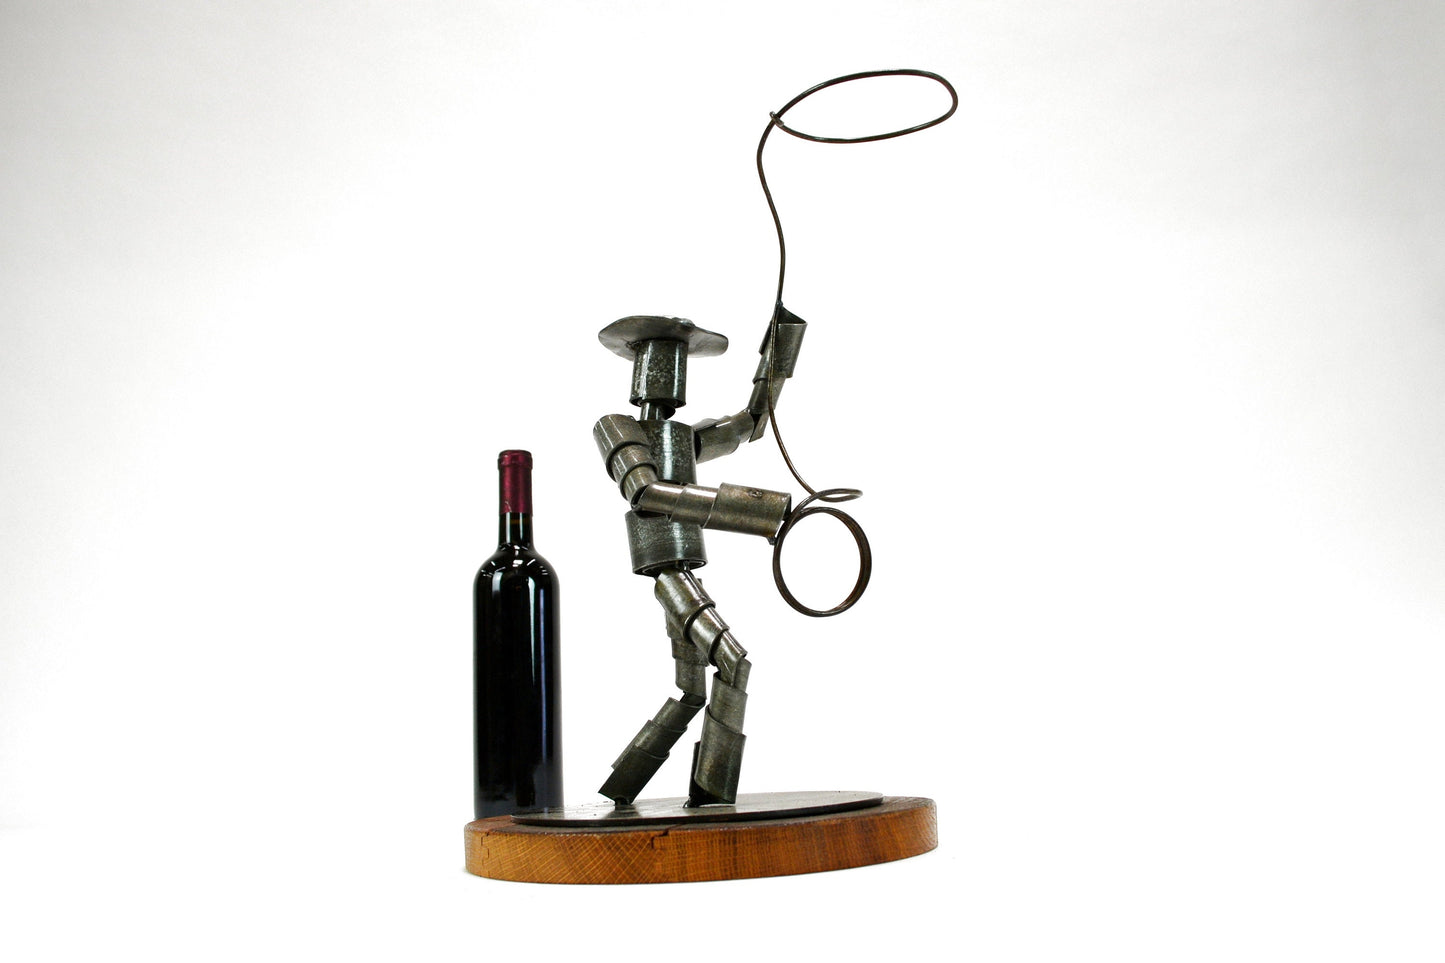 Cowboy Lasso Made From Retired Napa Wine Barrel Rings - Limited Edition - Signed + Numbered - 100% Recycled!